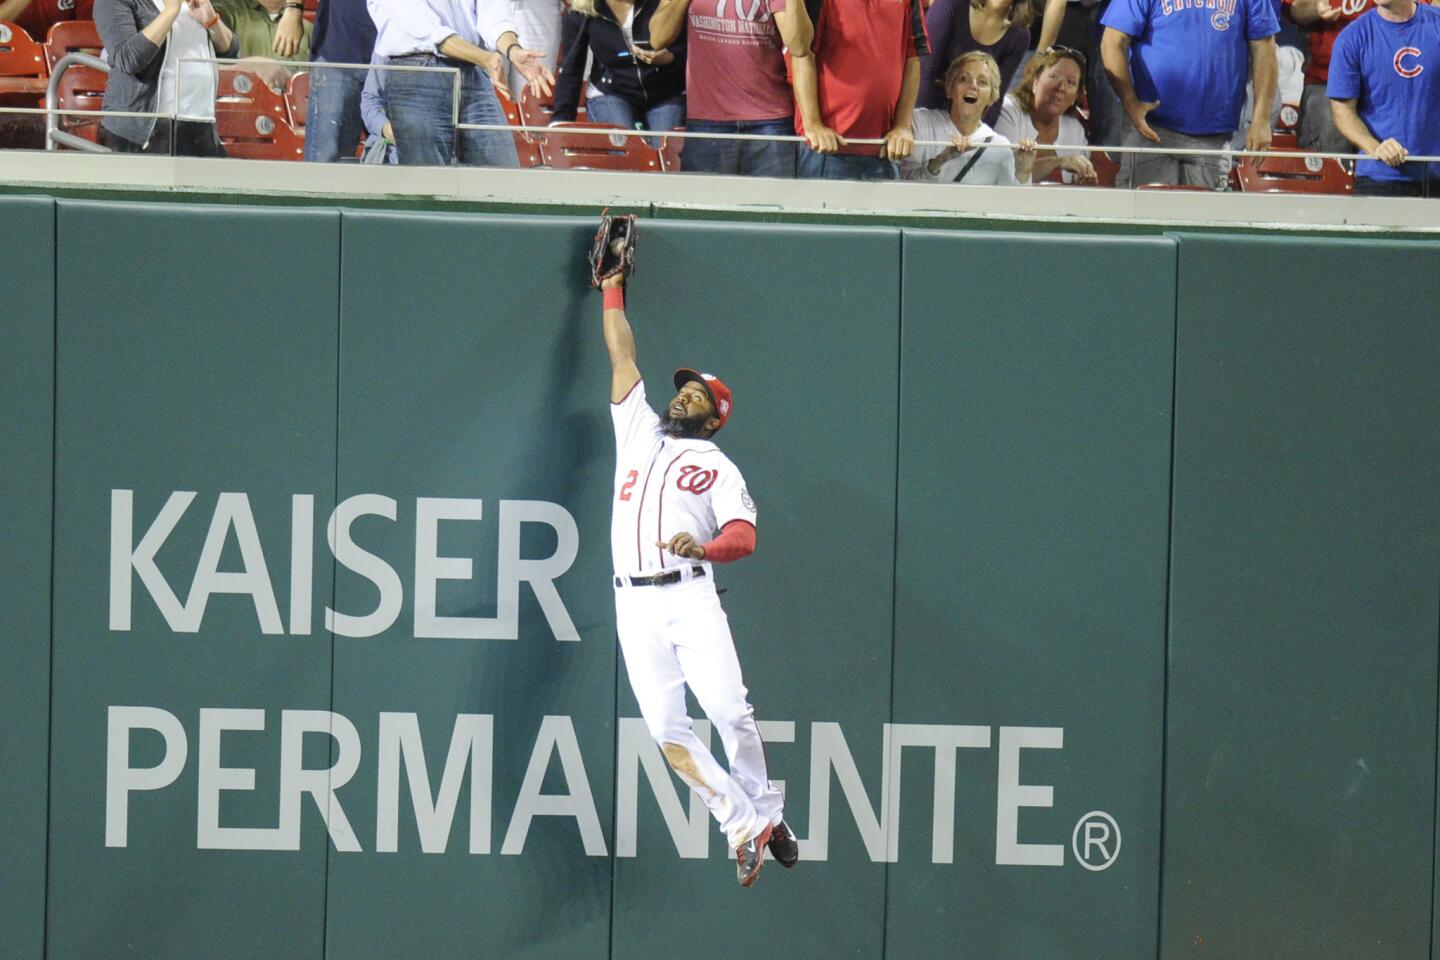 Denard Span catches a fly ball hit by Anthony Rizzo in the eighth inning.